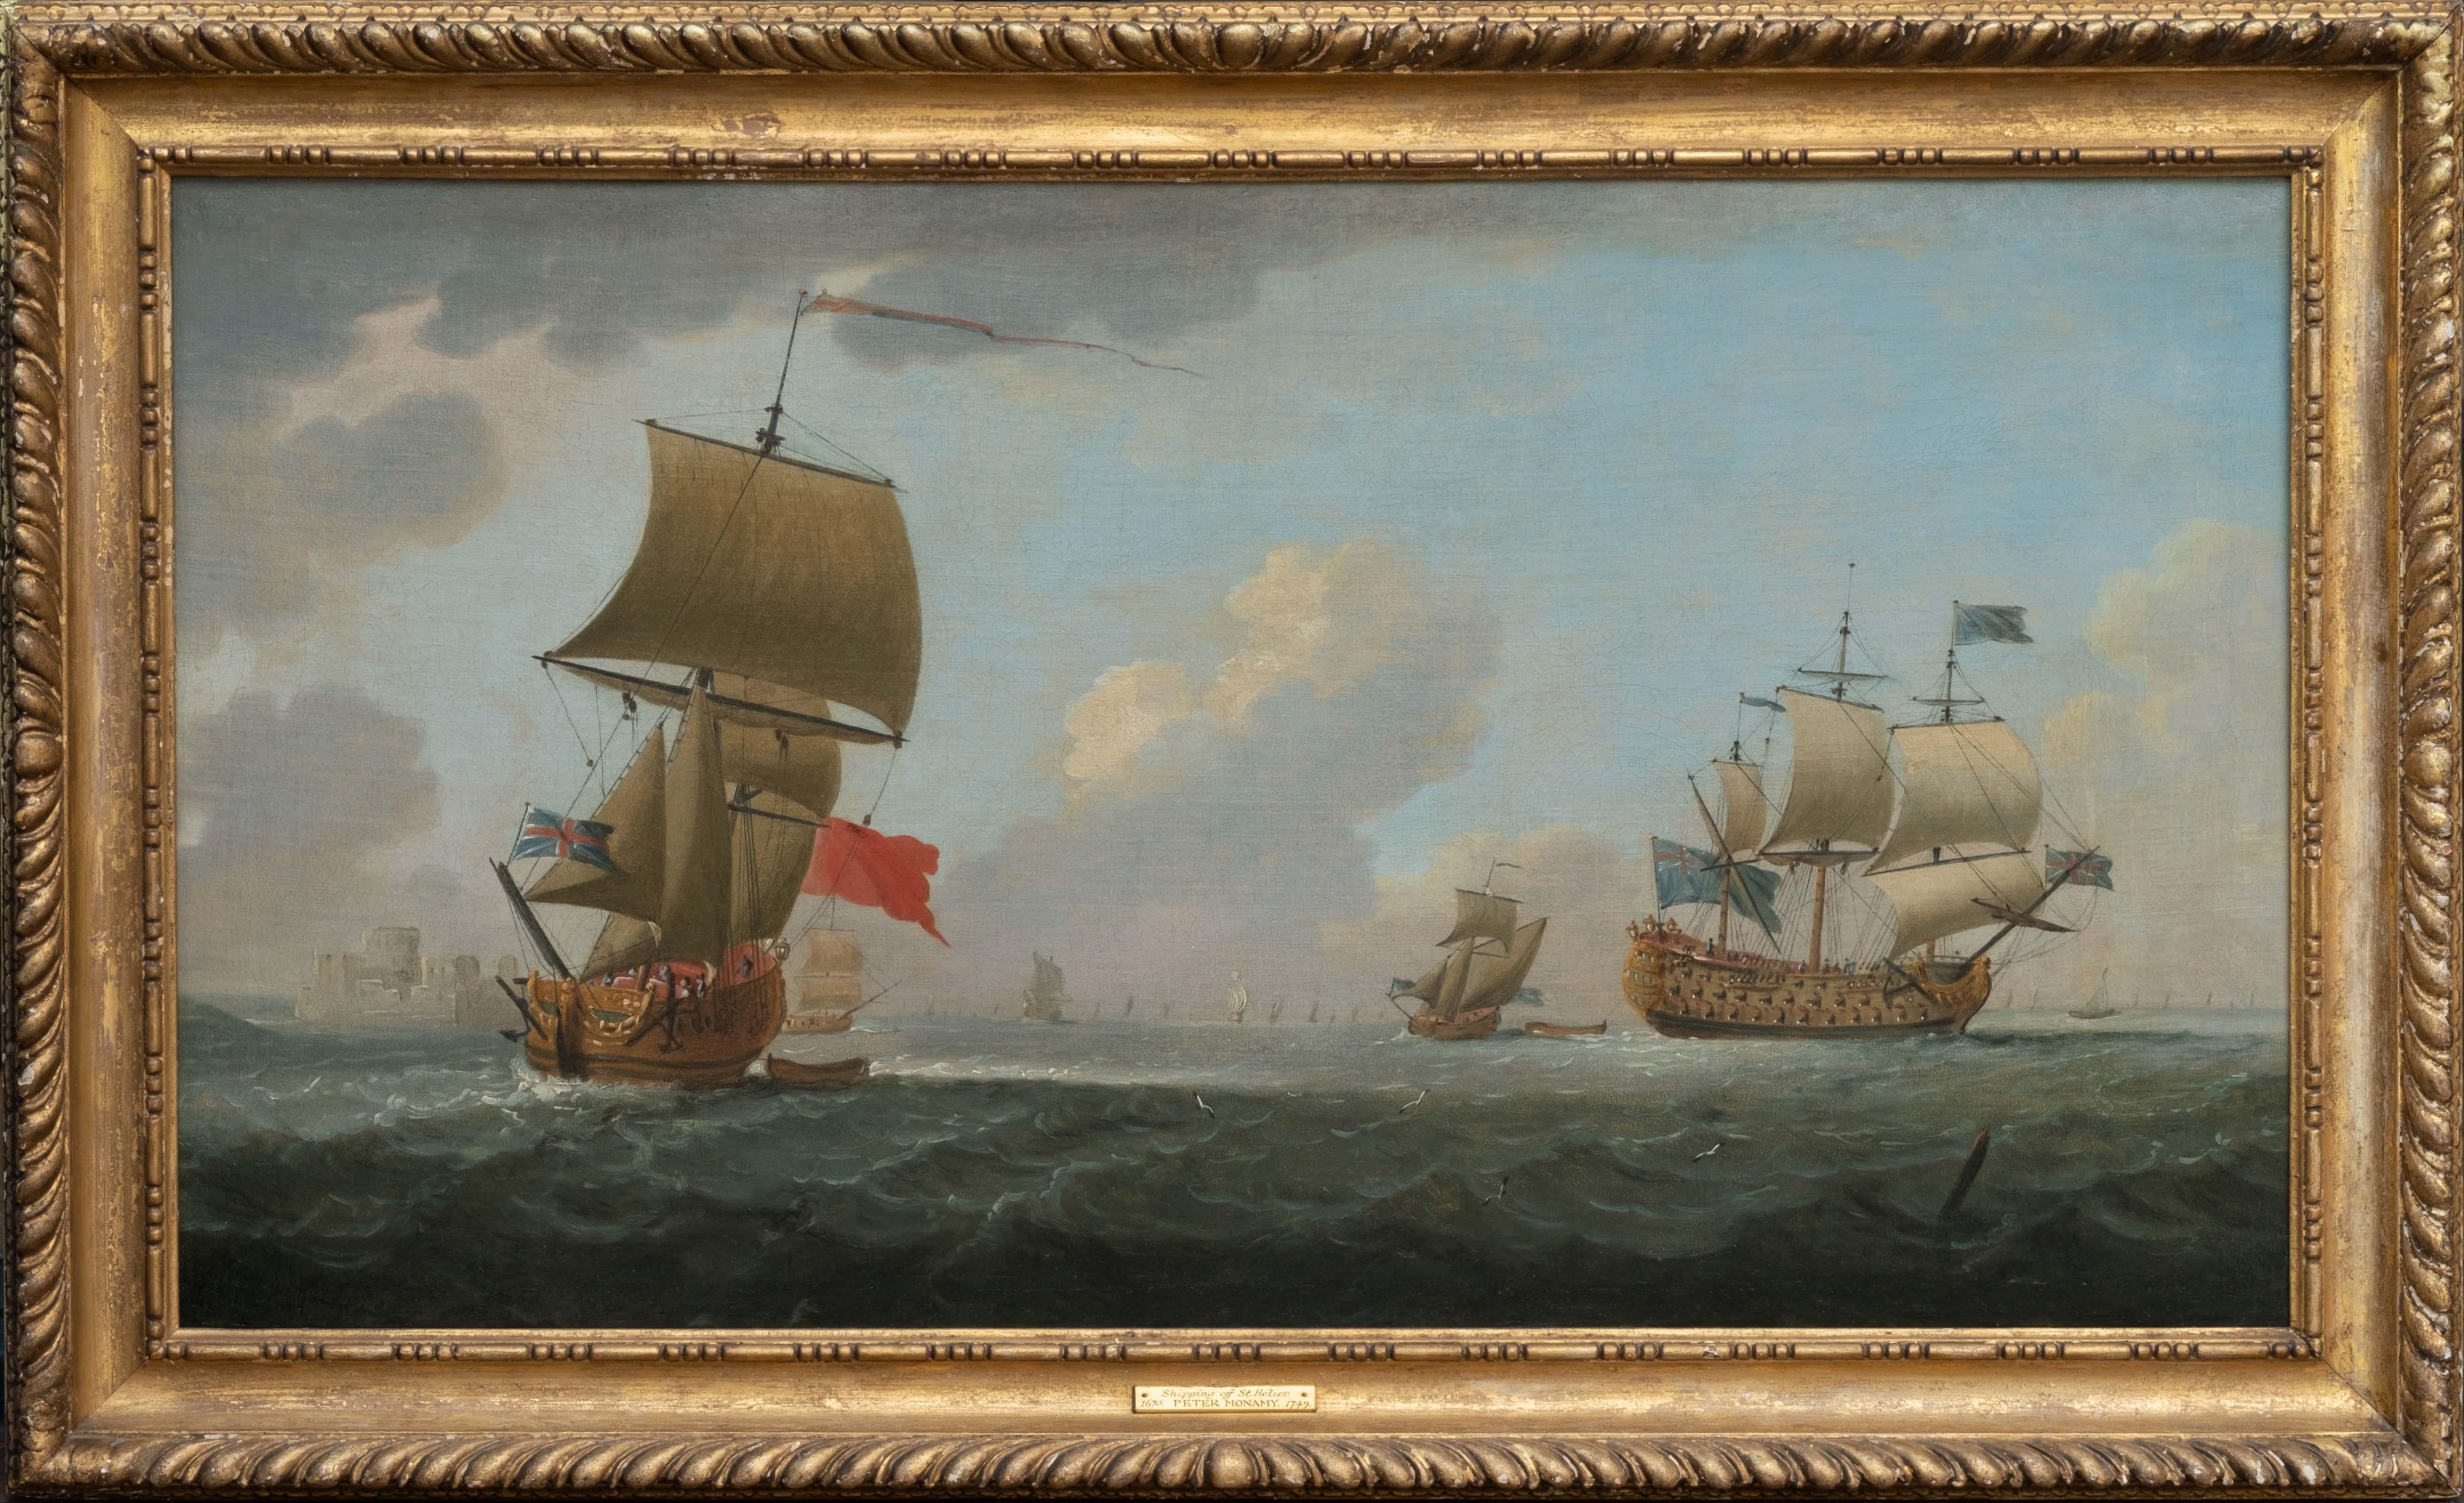 Peter Monamy Figurative Painting - 18th Century Monamy Oil Painting Seascape - Shipping off St. Helier, Jersey